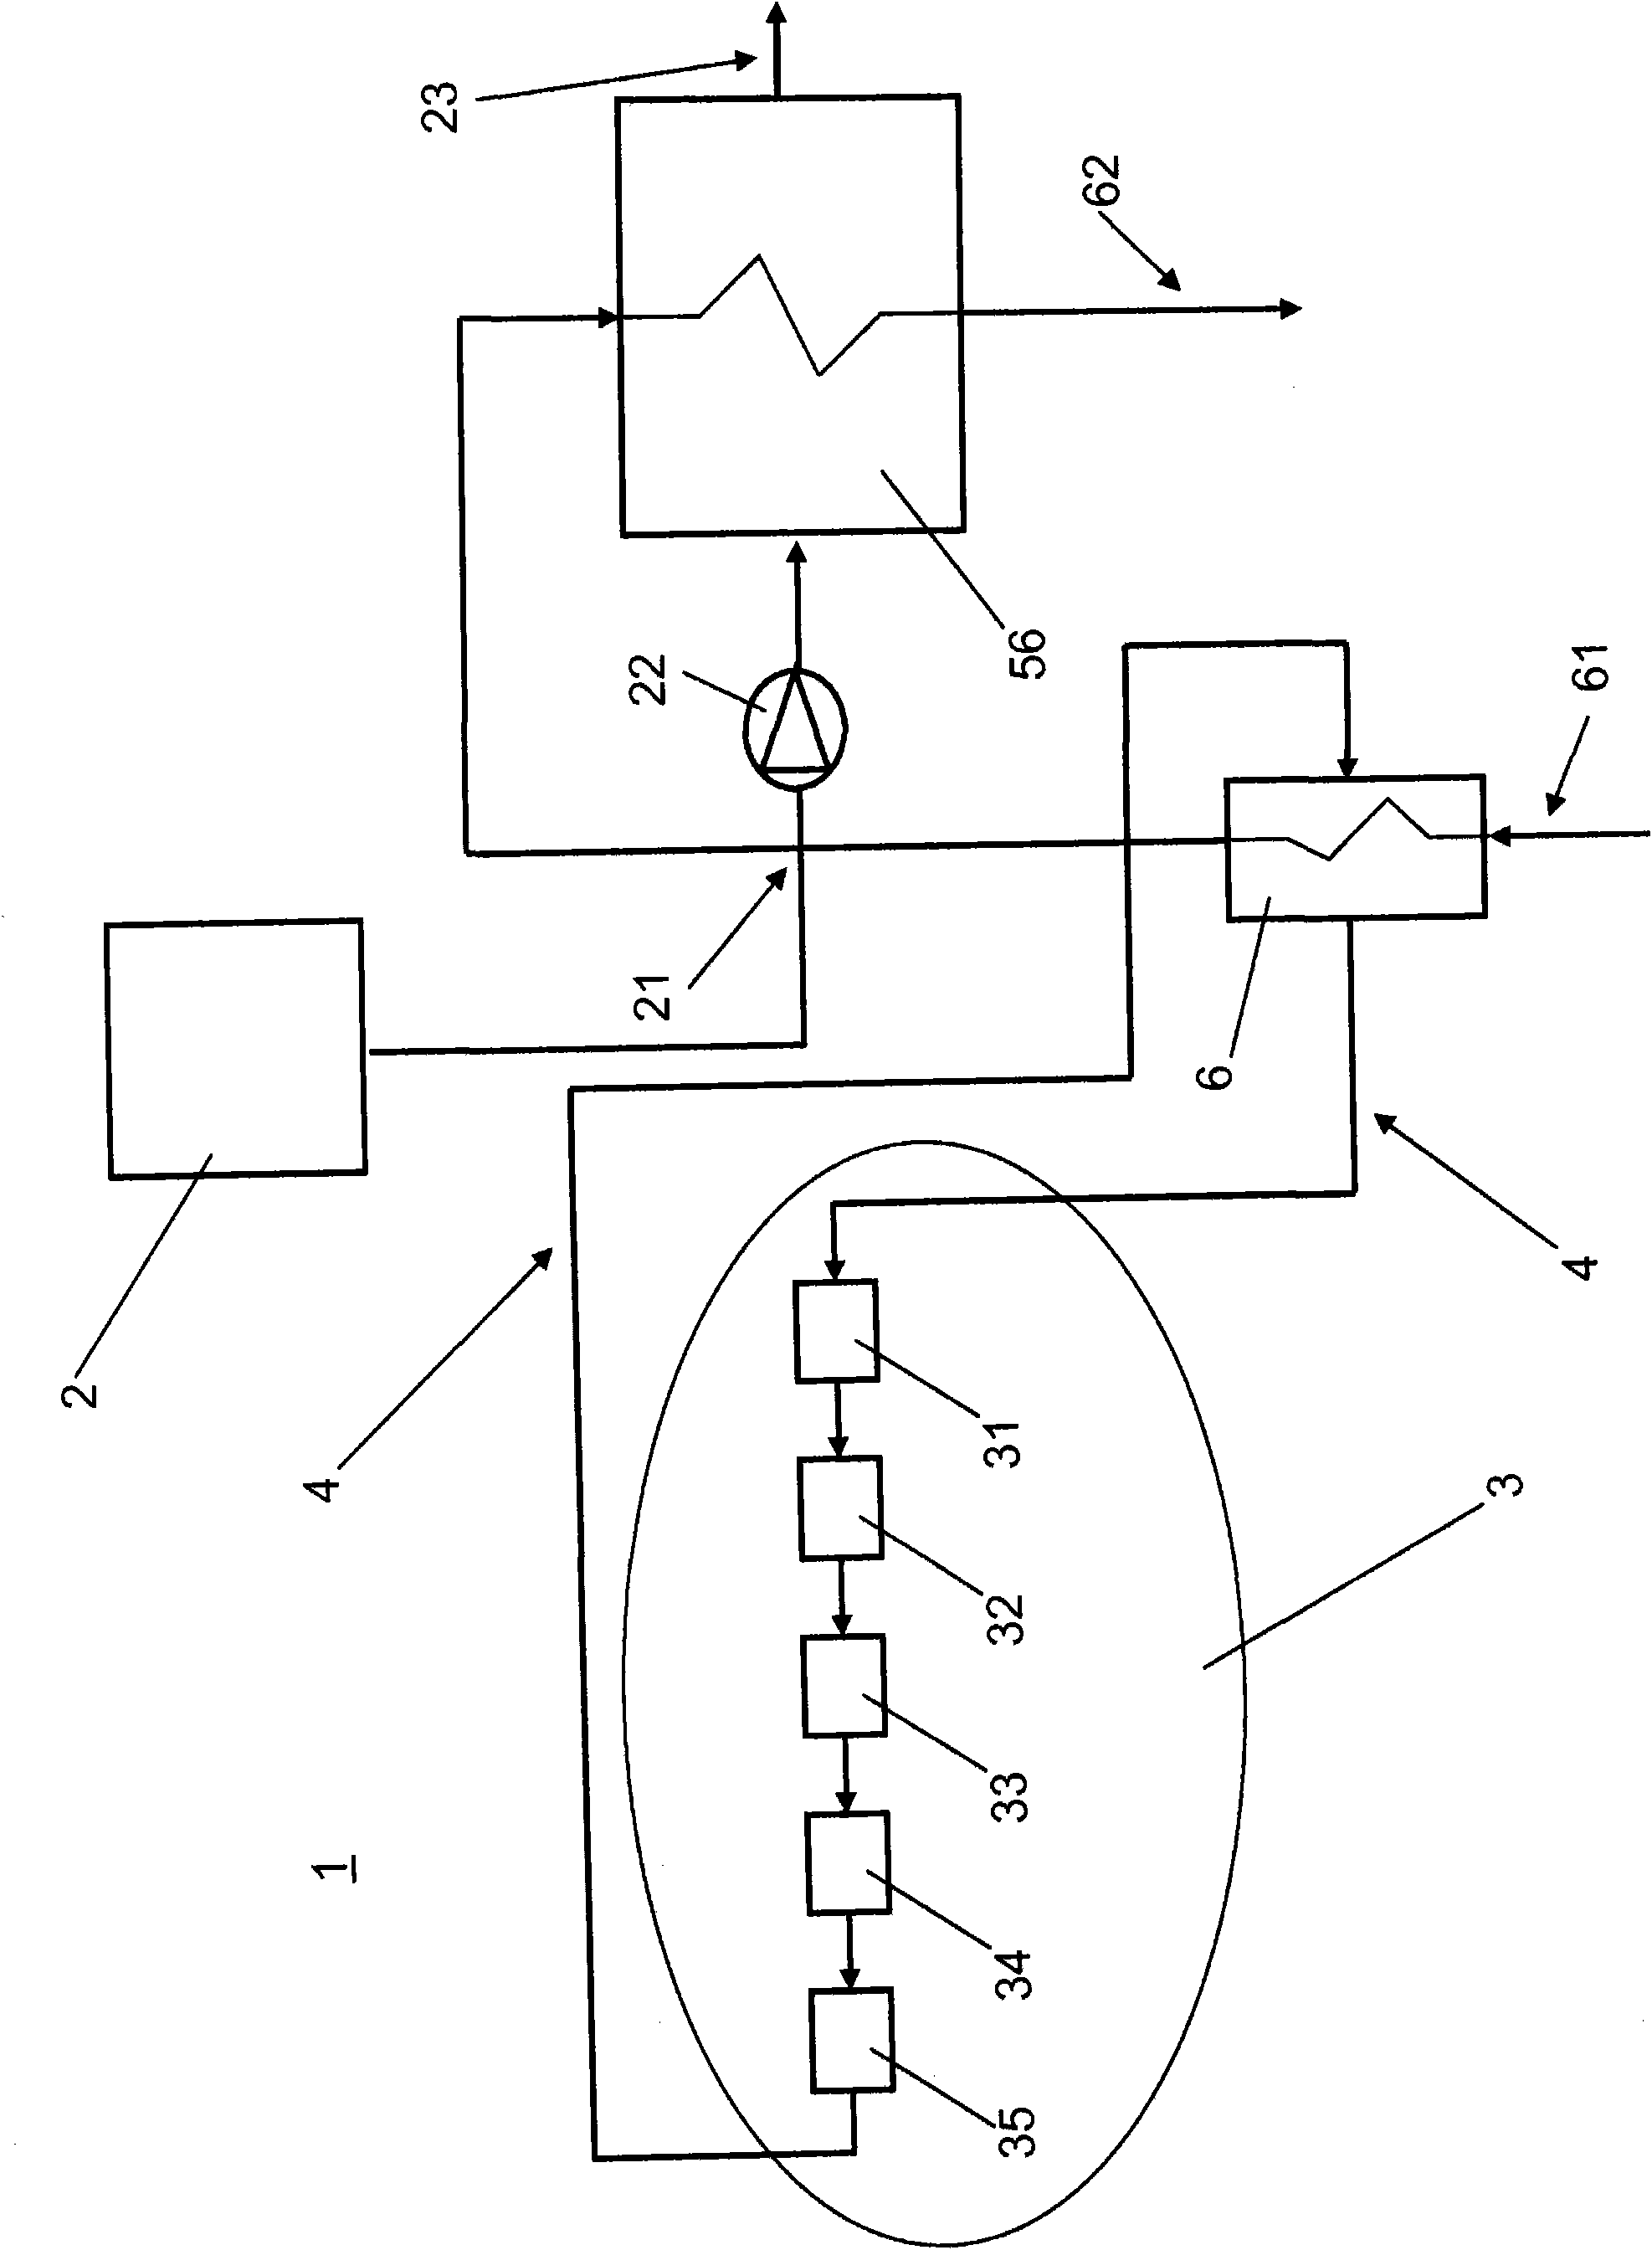 Floating LNG storage and re-gasification unit and method for re-gasification of LNG on said unit